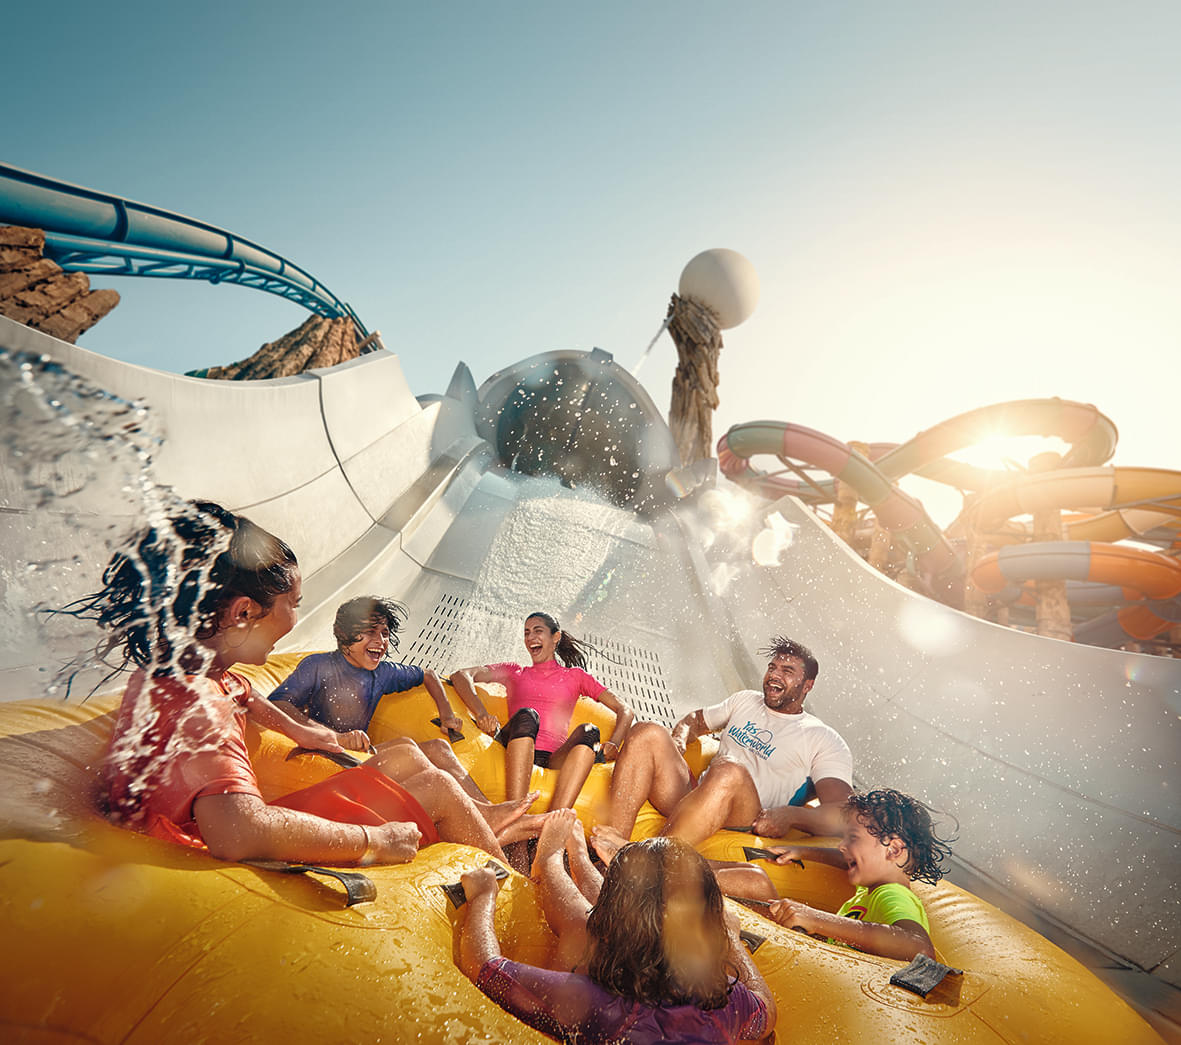 Experience the rush of Falcons Falaj, where water coaster meets gravity-defying thrills